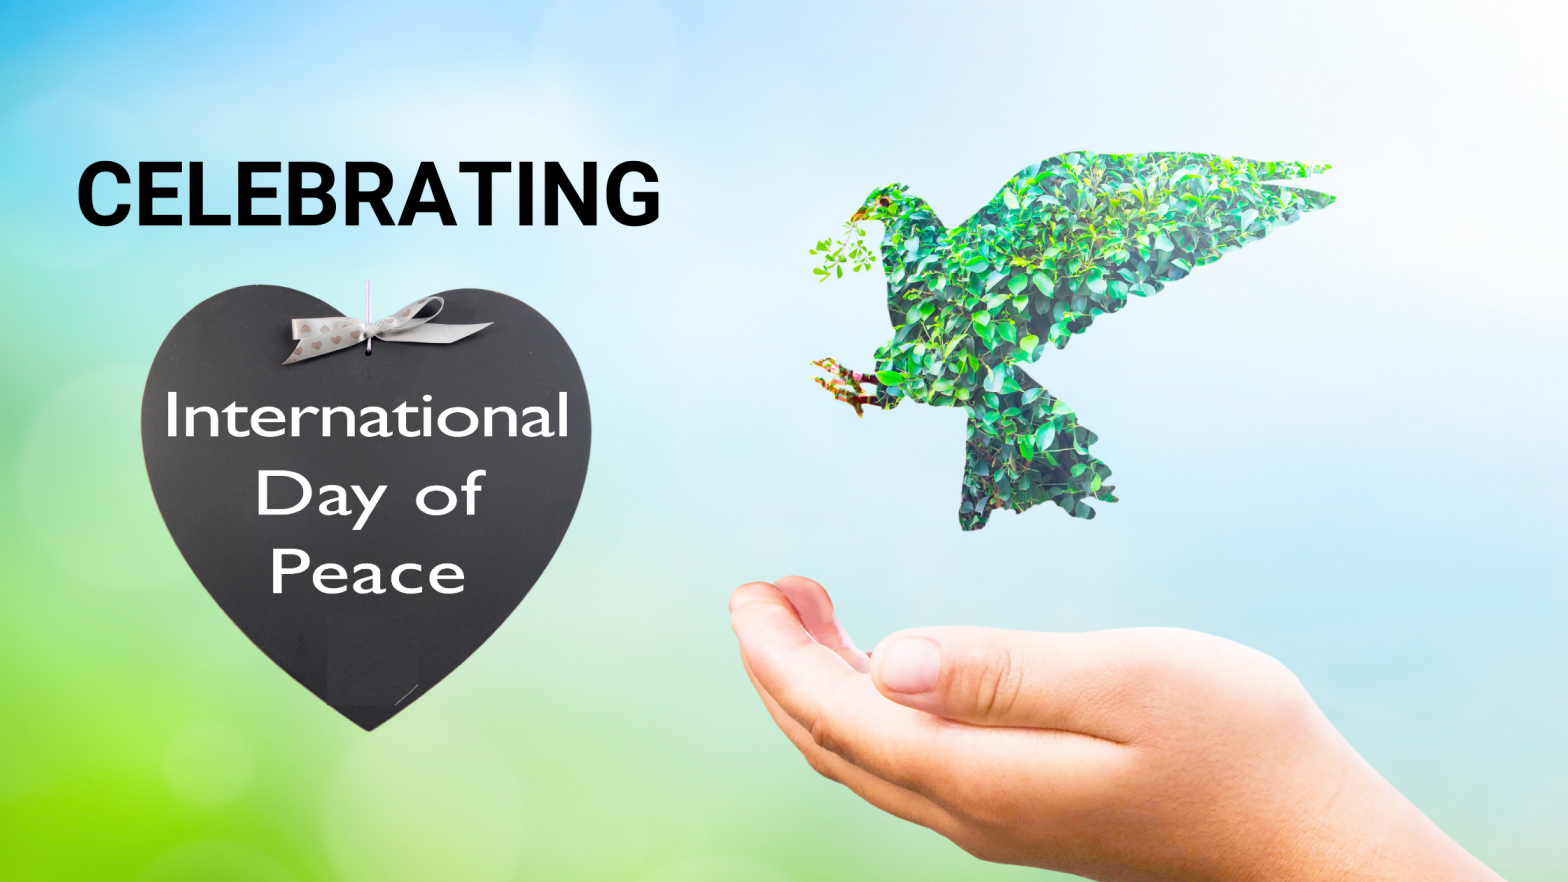 Celebrating 2020 International Day of Peace with the HM Community